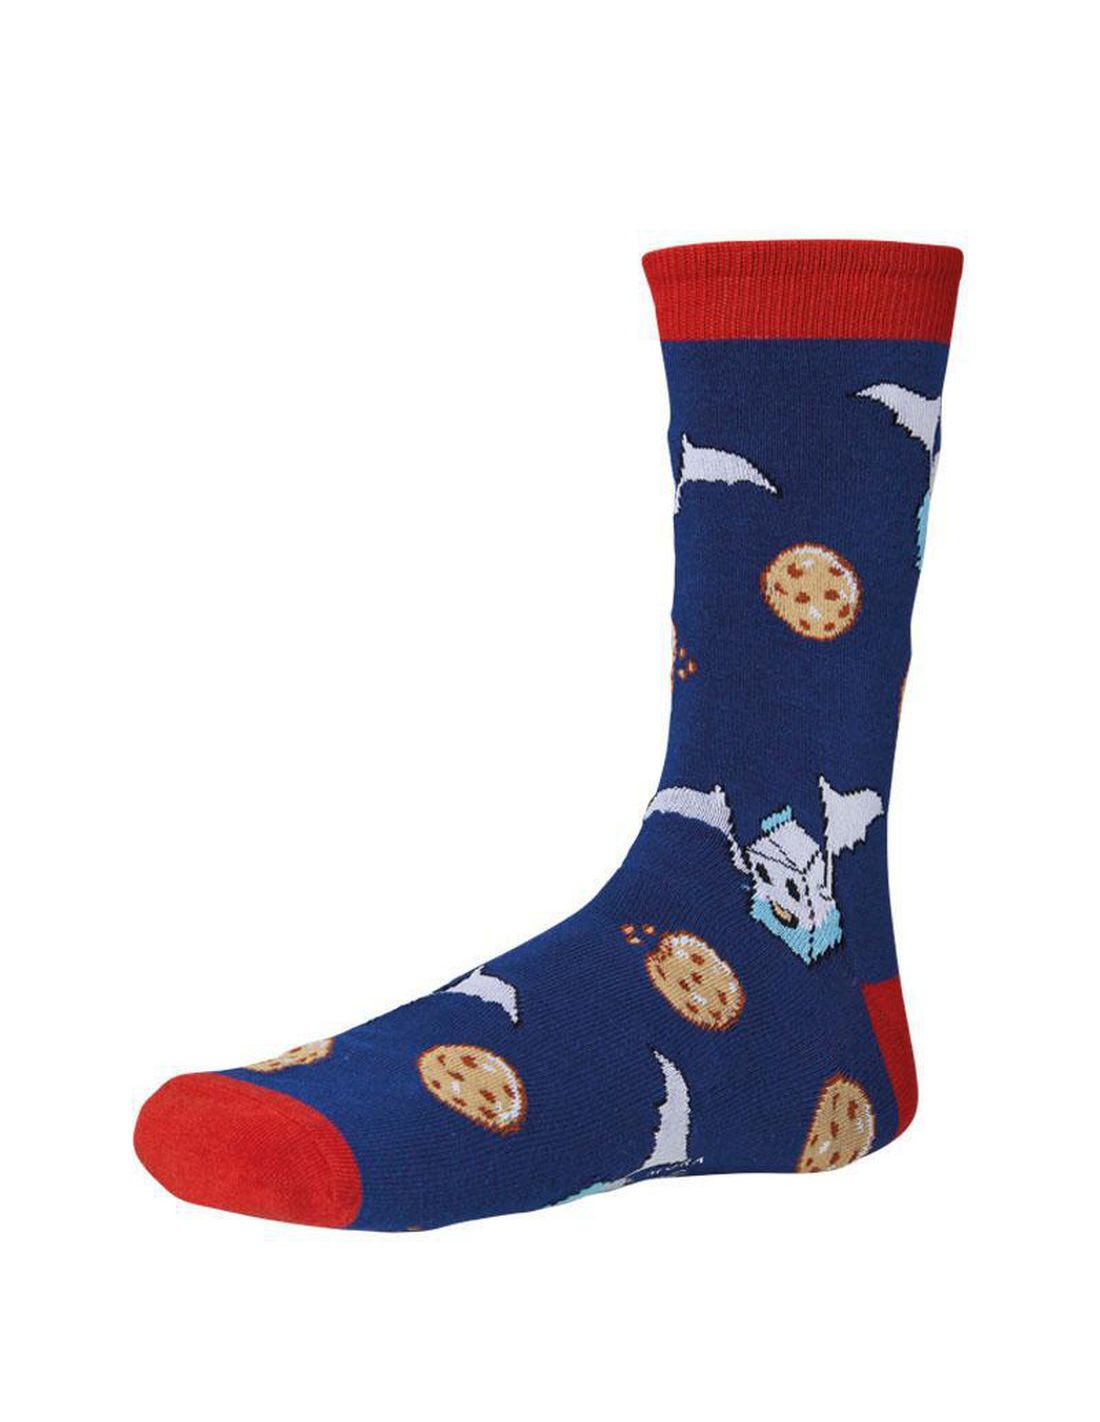 Ysabel Mora 22800 Milk & Cookies Sock - Dark blue cotton ankle socks with an all over cookies and personified milk cartons pattern, red coloured cuff heel and toe.